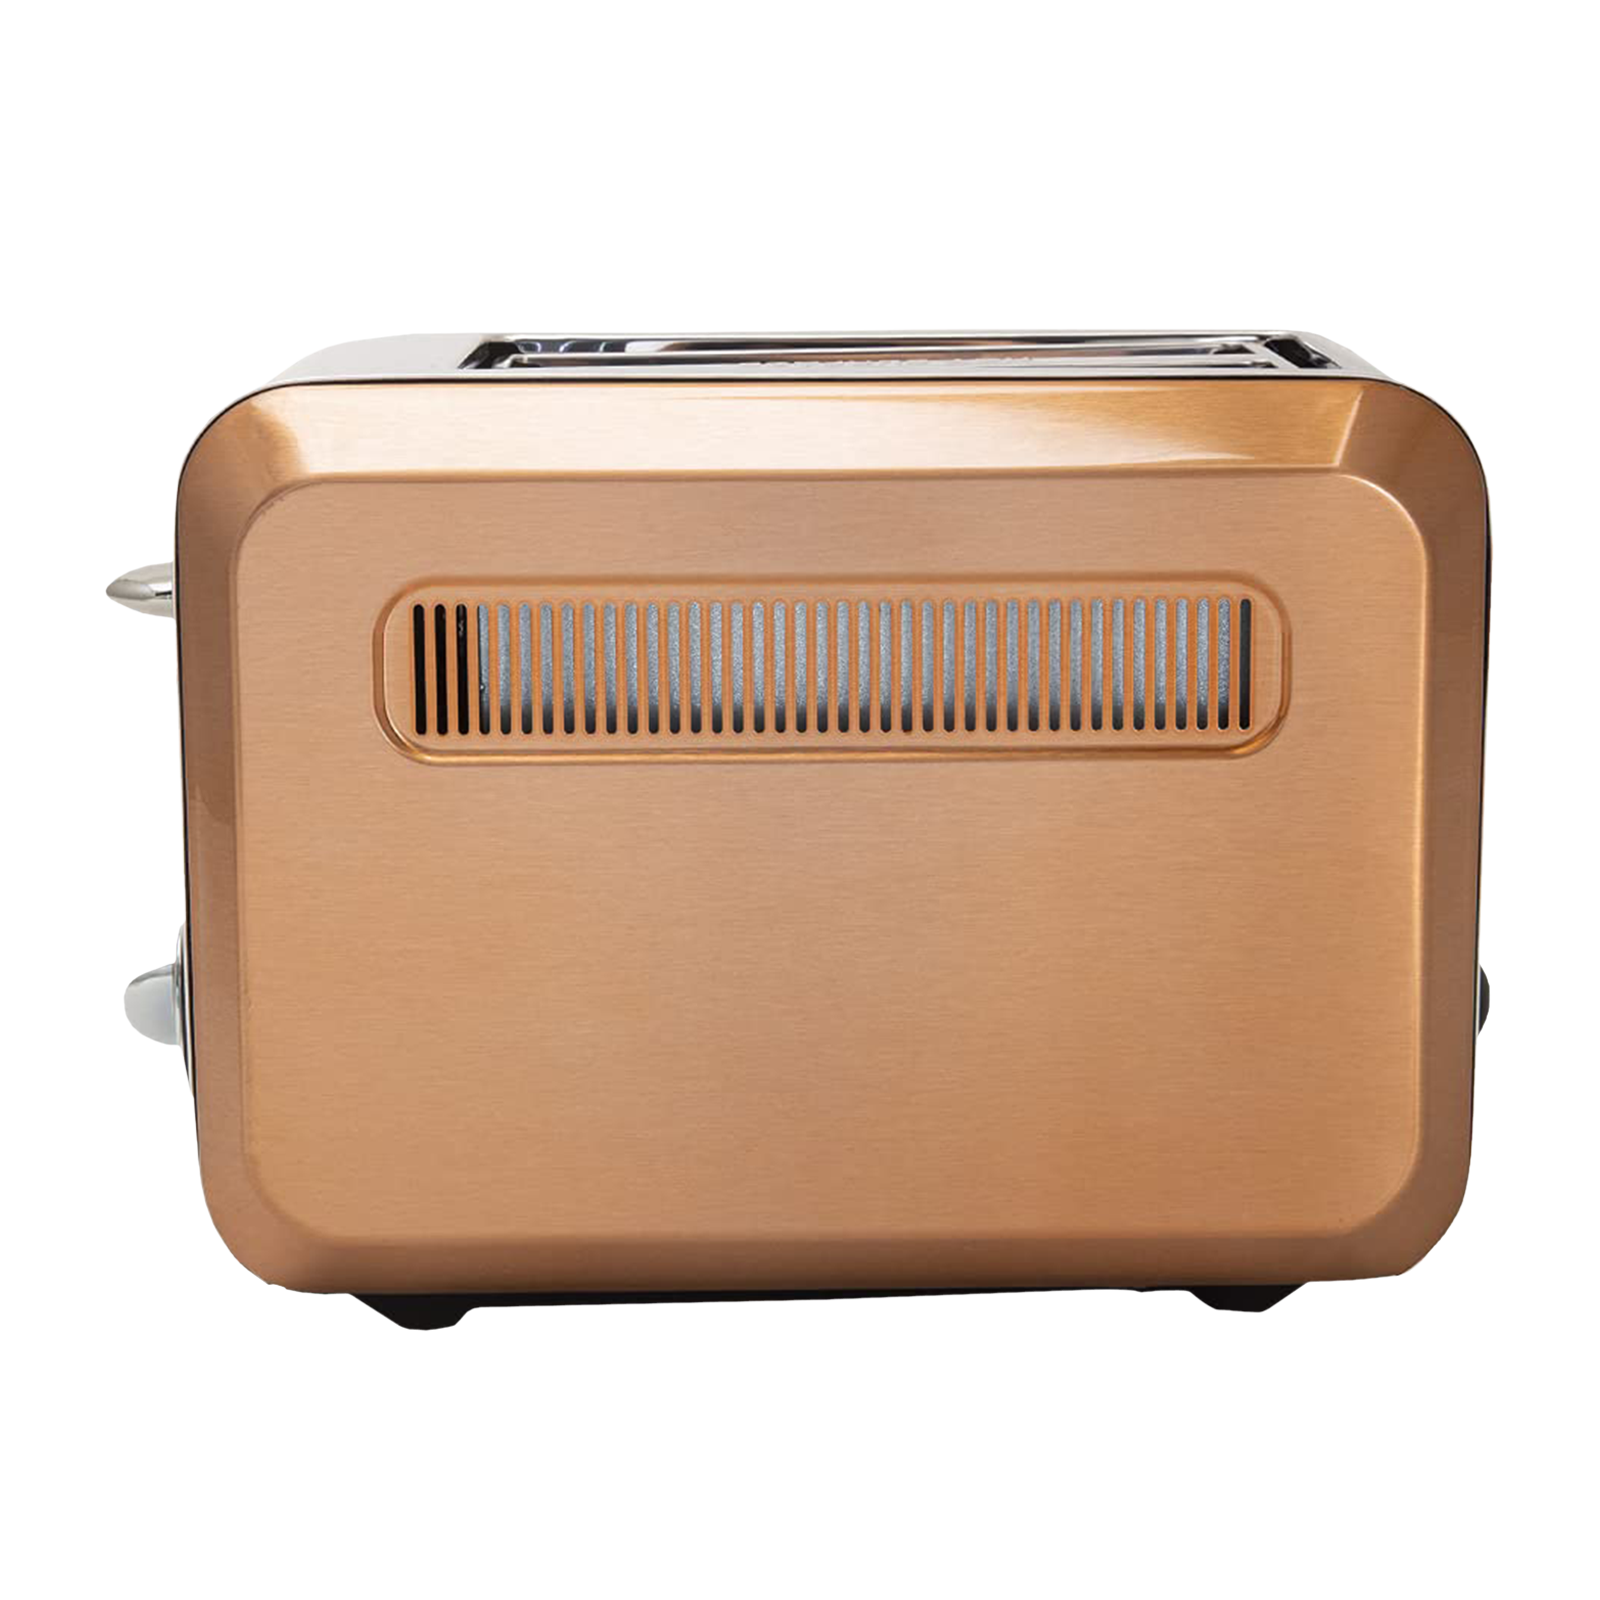 Haden Boston Pyramid 815 Watts 2 Slice Automatic Pop-up Toaster (Browning Control, 189738-R, Copper)